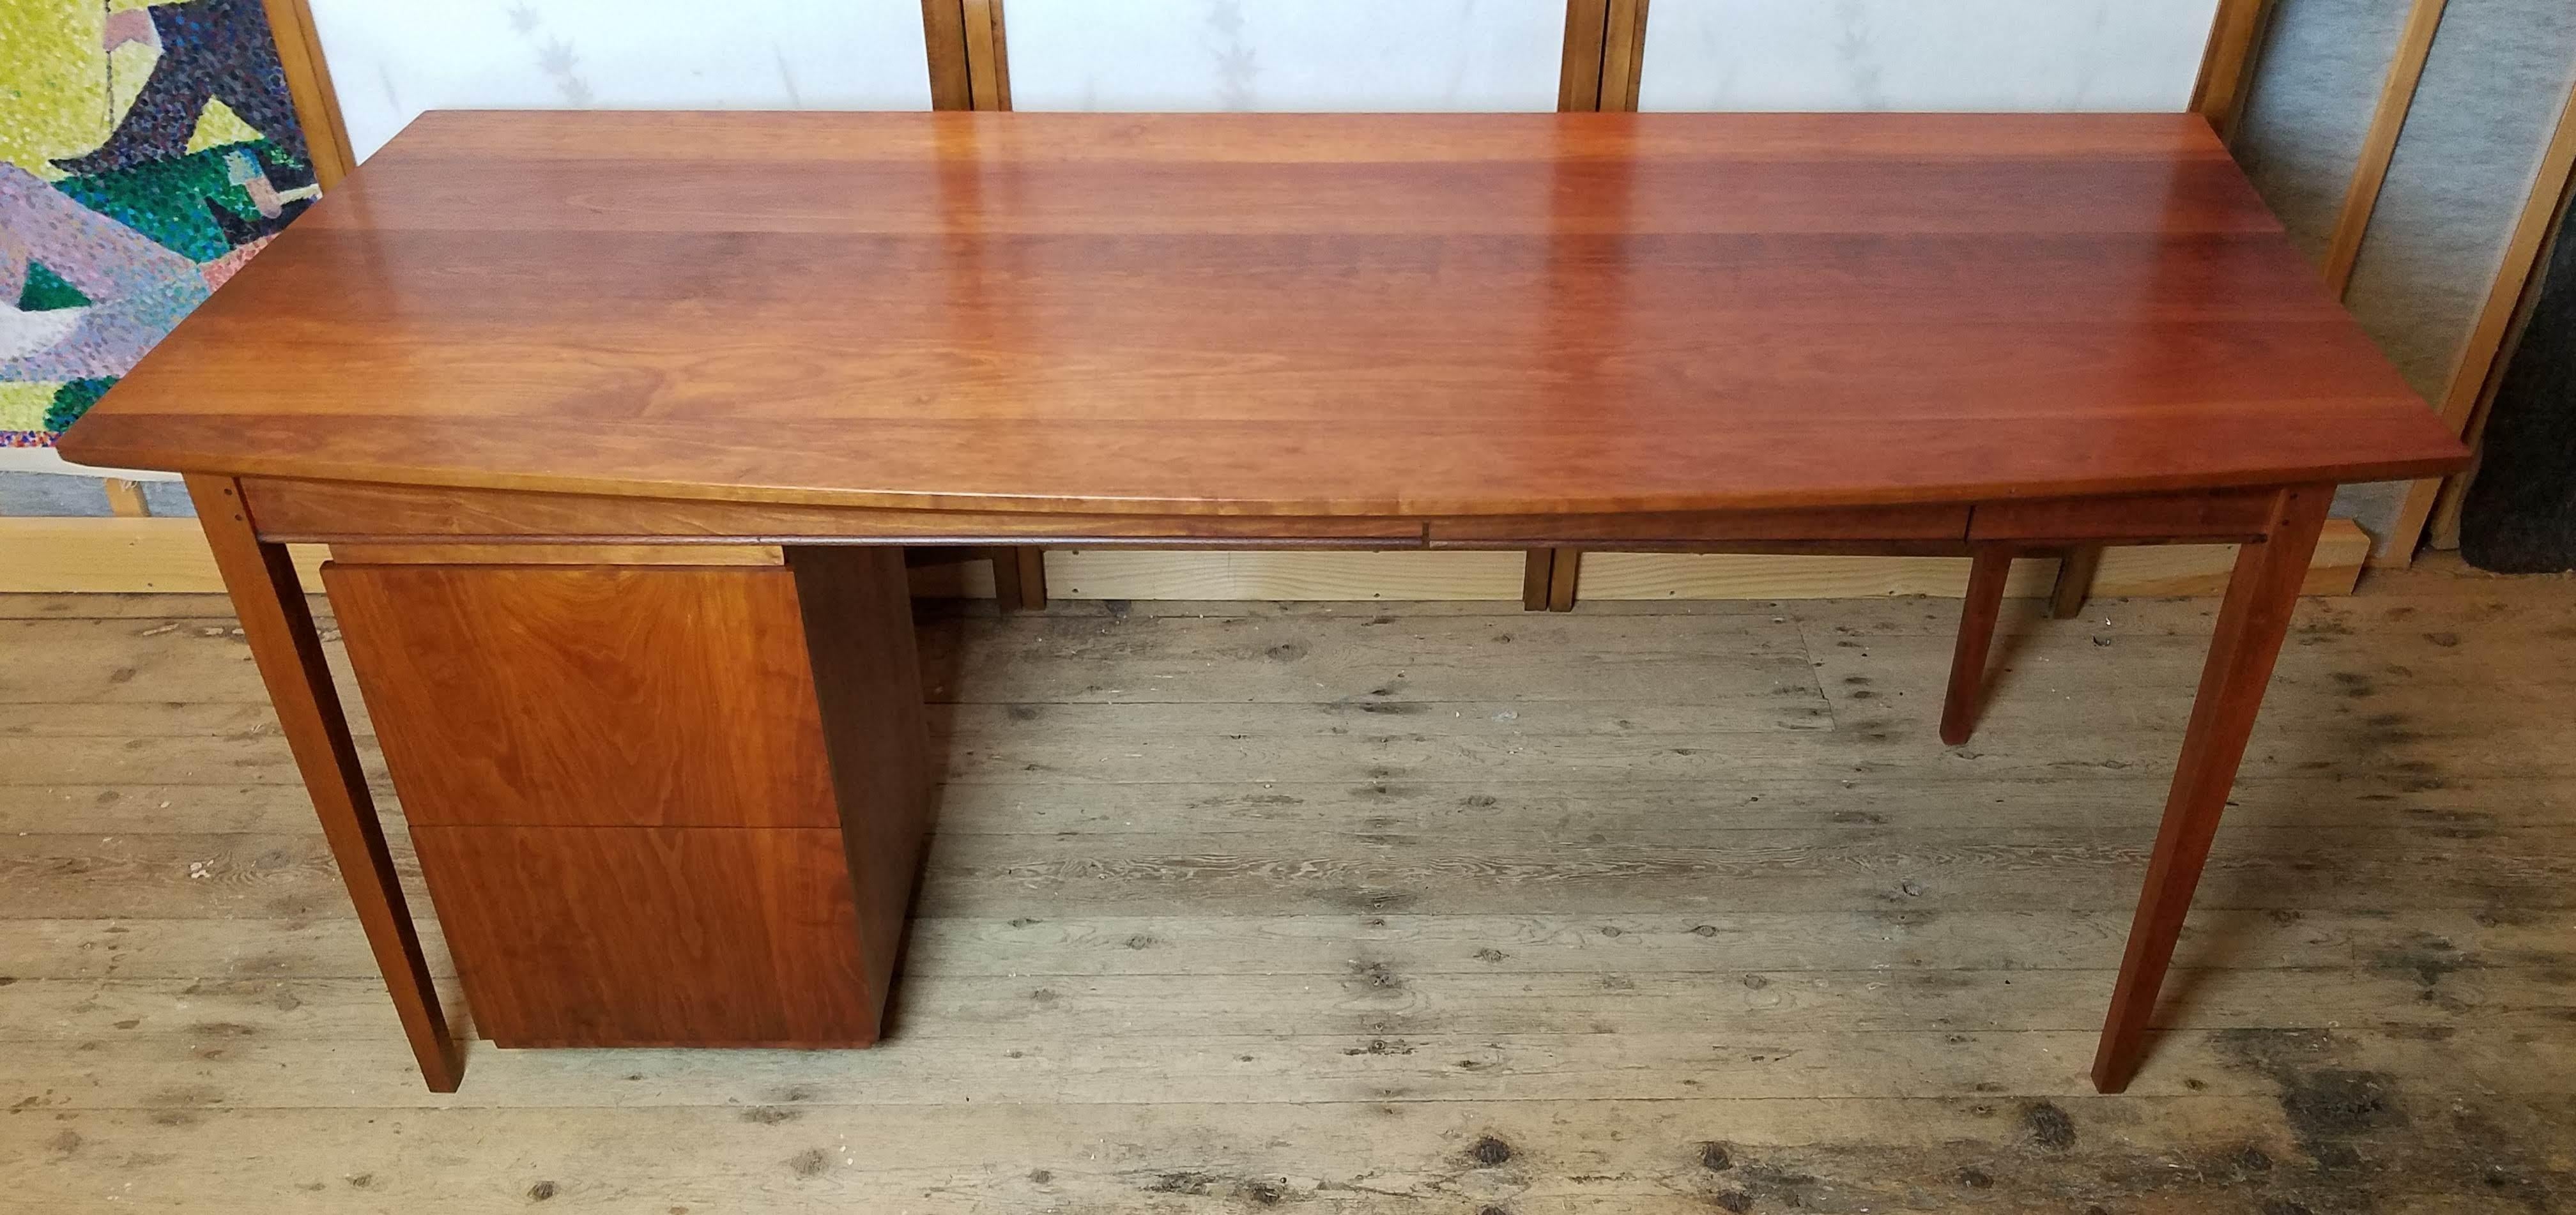 Bow front cherry desk with two suspended drawers studio built in Portland Maine in the 1980s in the style of Thomas Moser.
A hand pegged construction with different radius arcs for the ends of this beautifully grained solid cherry planked